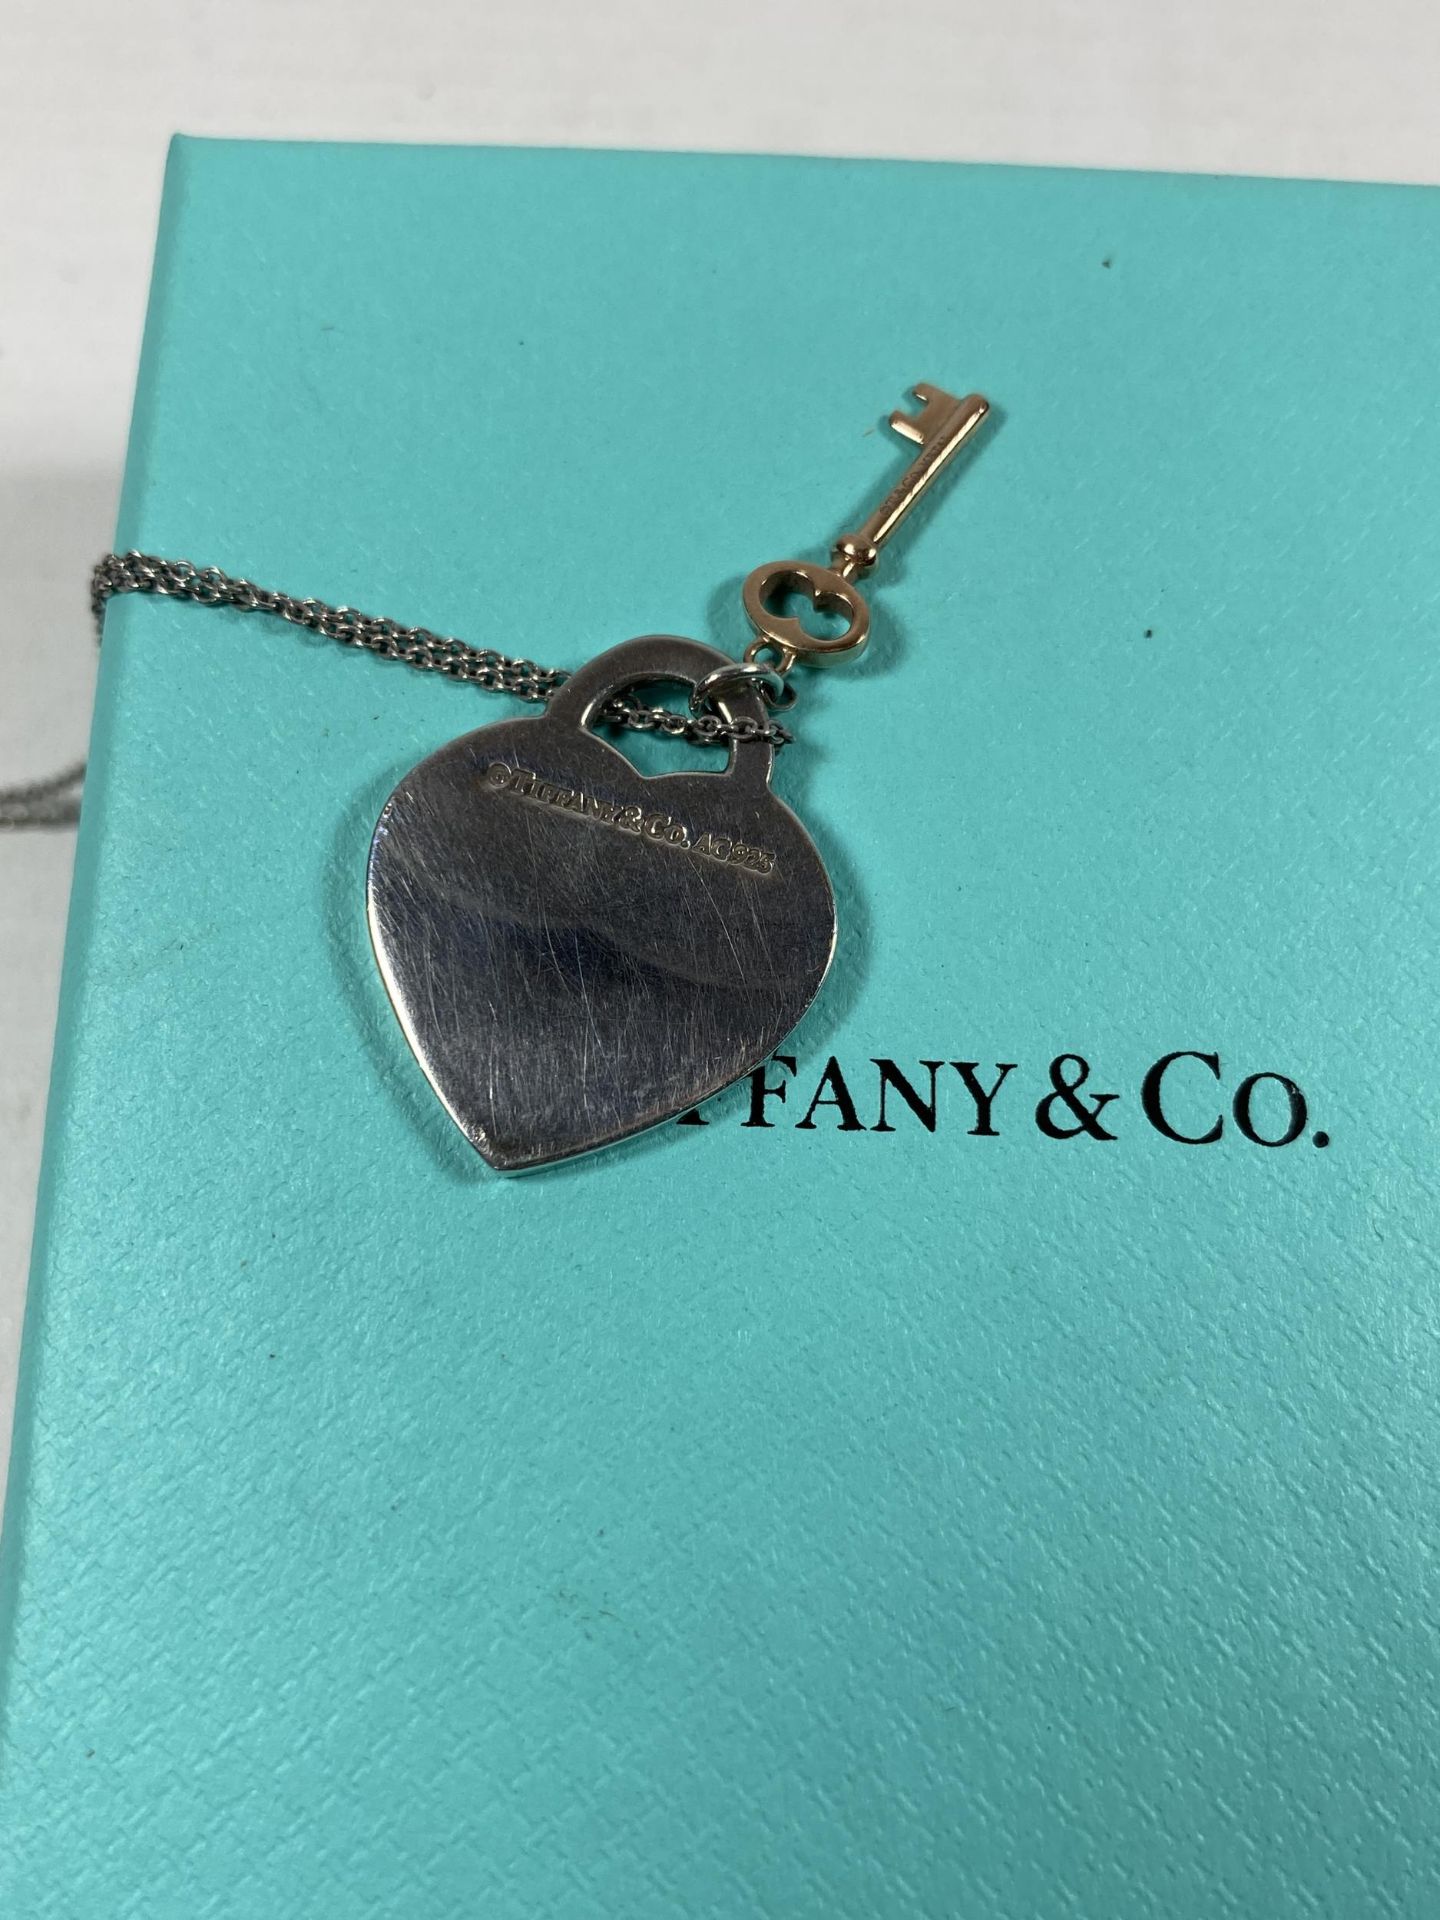 A TIFFANY & CO .925 SILVER HEART PENDANT NECKLACE WITH TIFFANY KEY & ORIGINAL RETAILER'S BOX - Image 3 of 4